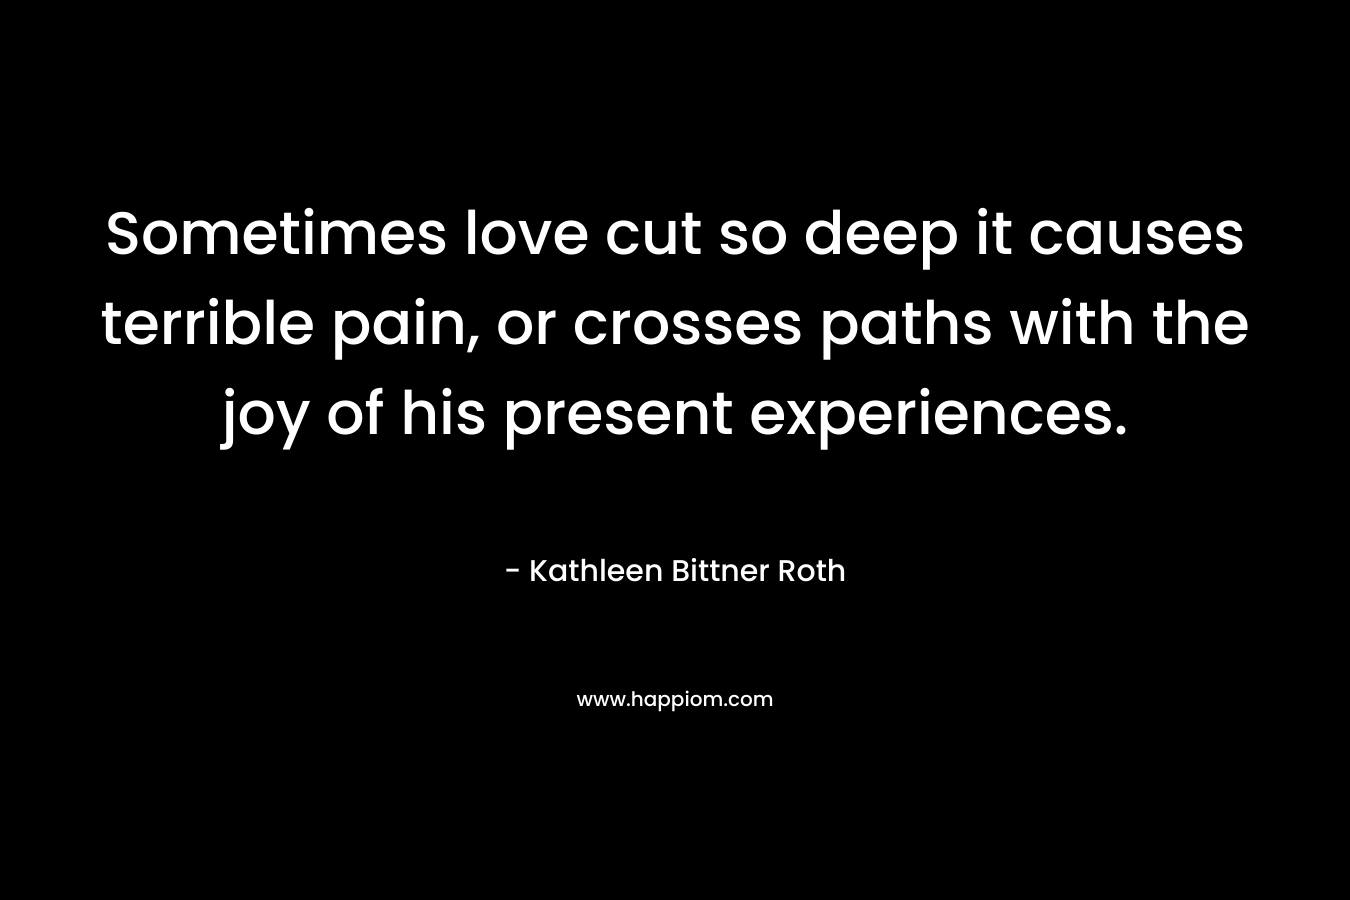 Sometimes love cut so deep it causes terrible pain, or crosses paths with the joy of his present experiences.